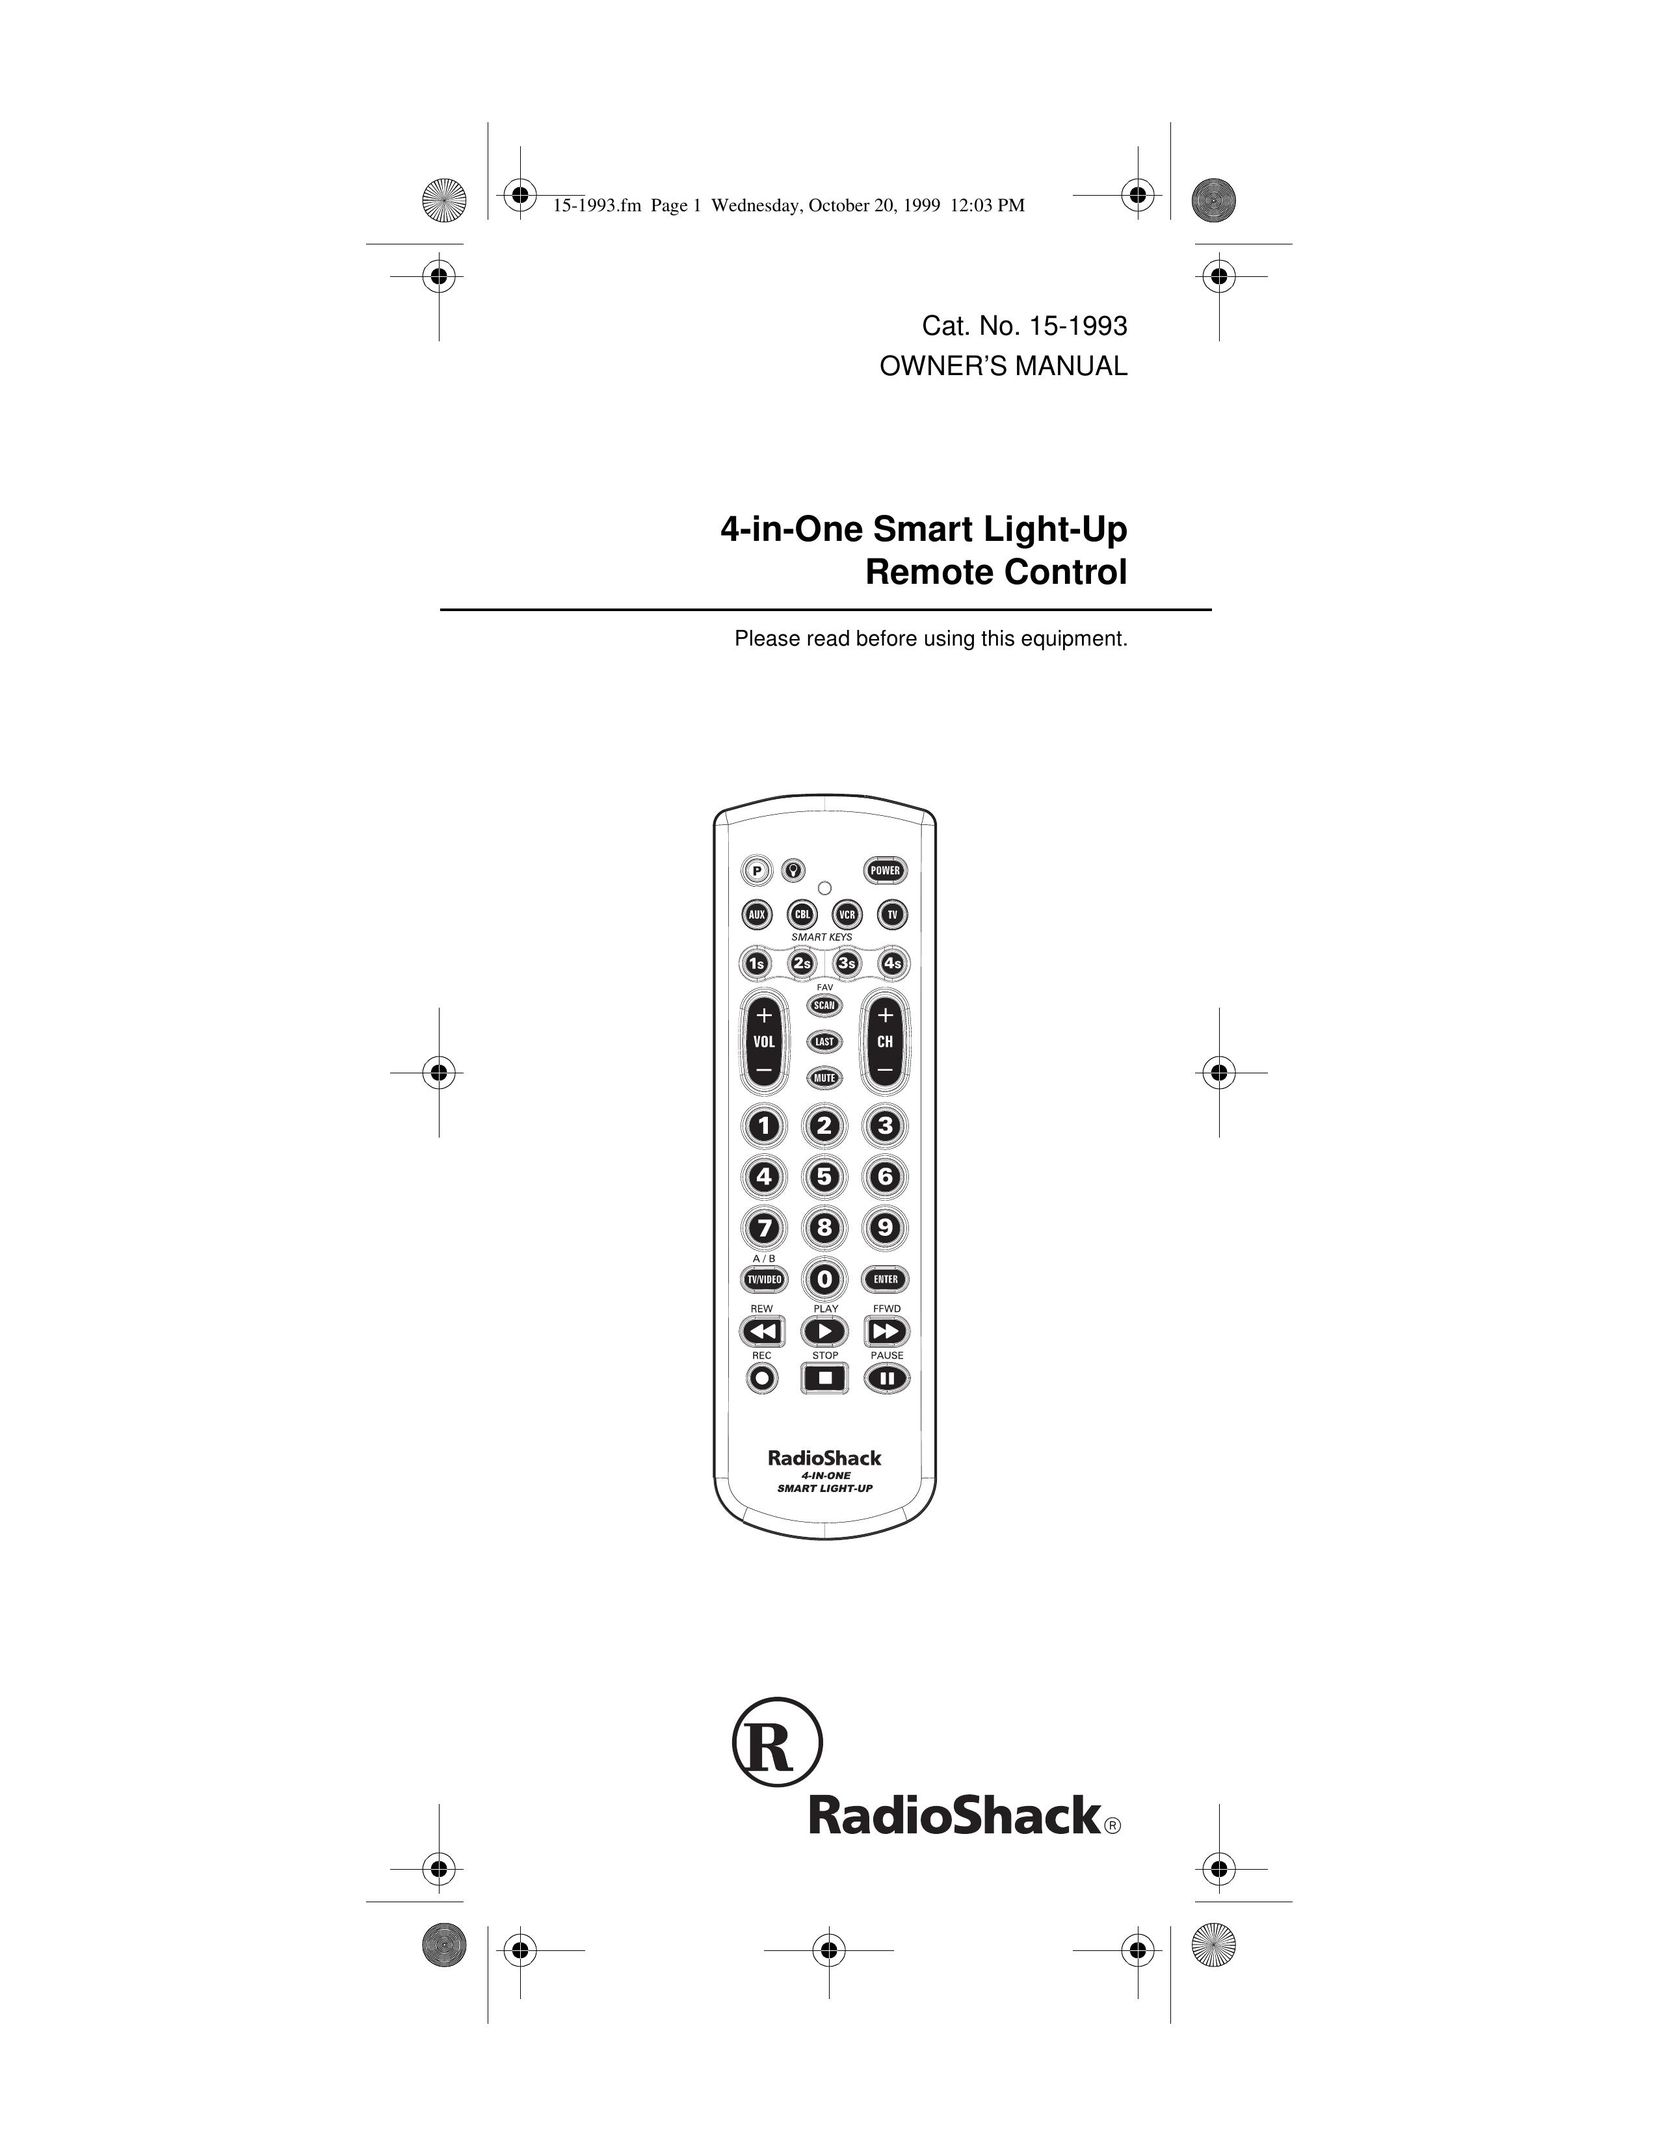 Radio Shack 4-in-One Smart Light-Up Remote Control Universal Remote User Manual